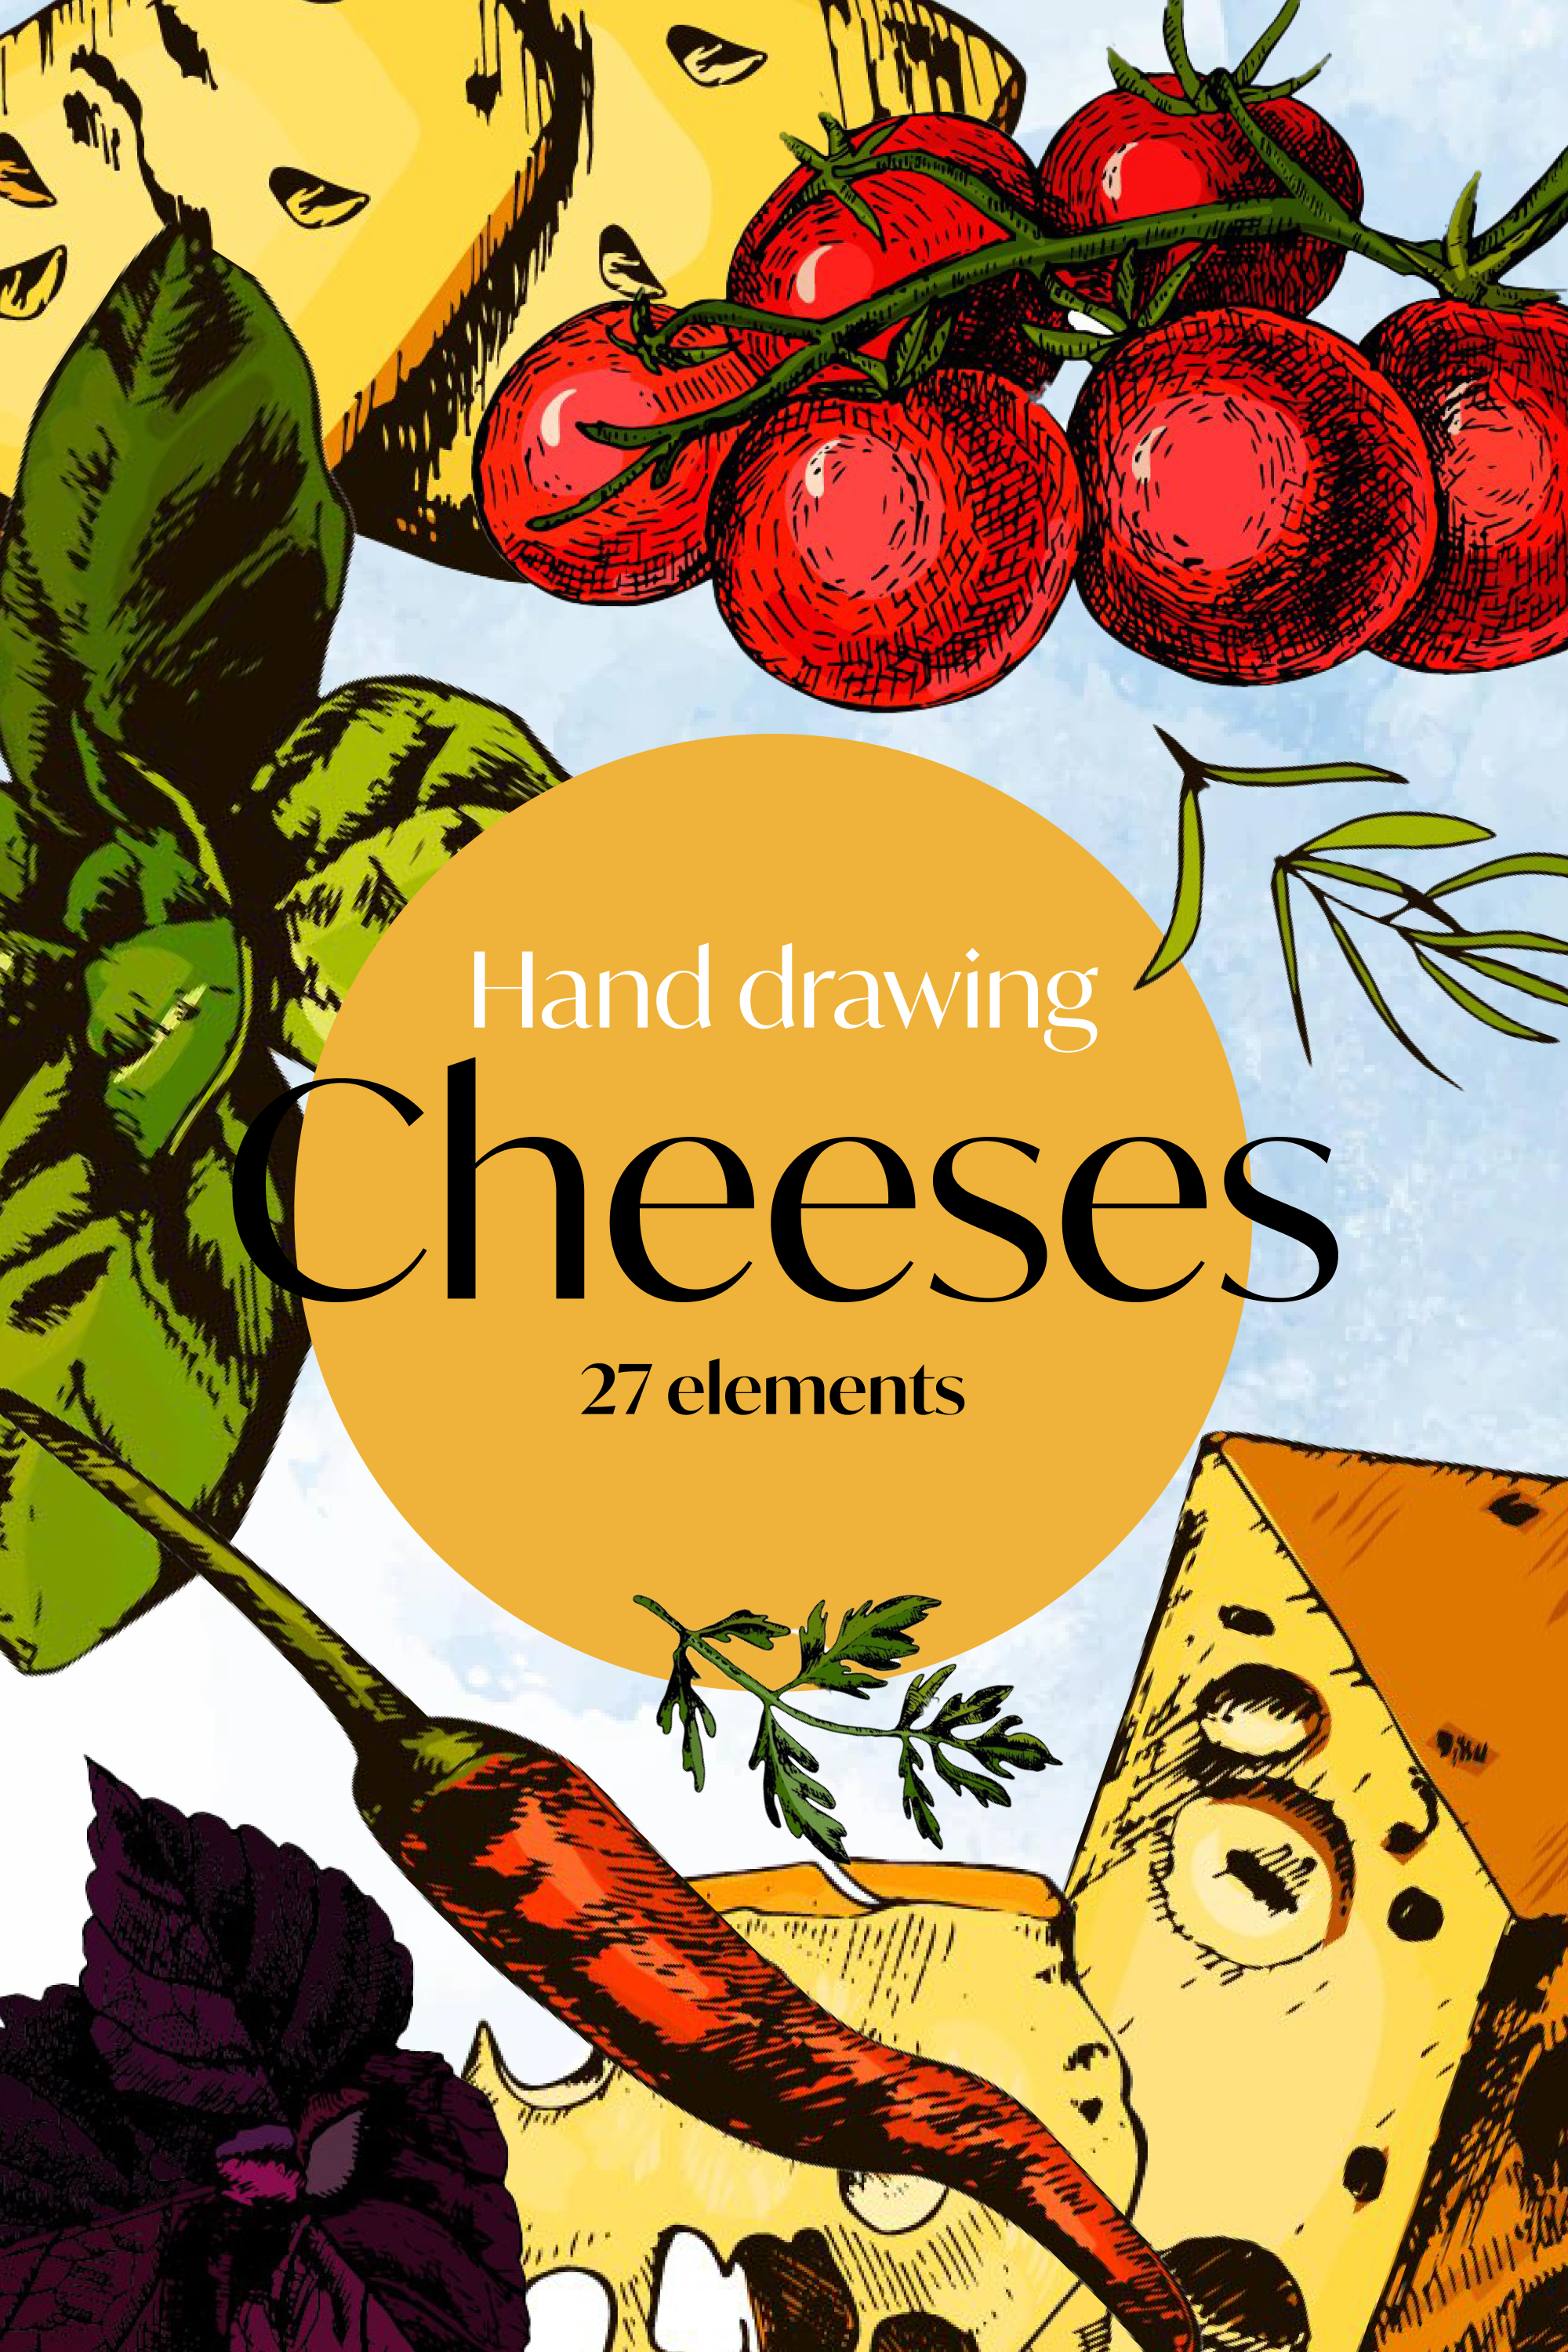 Collection of bright images of hard cheese and vegetables.